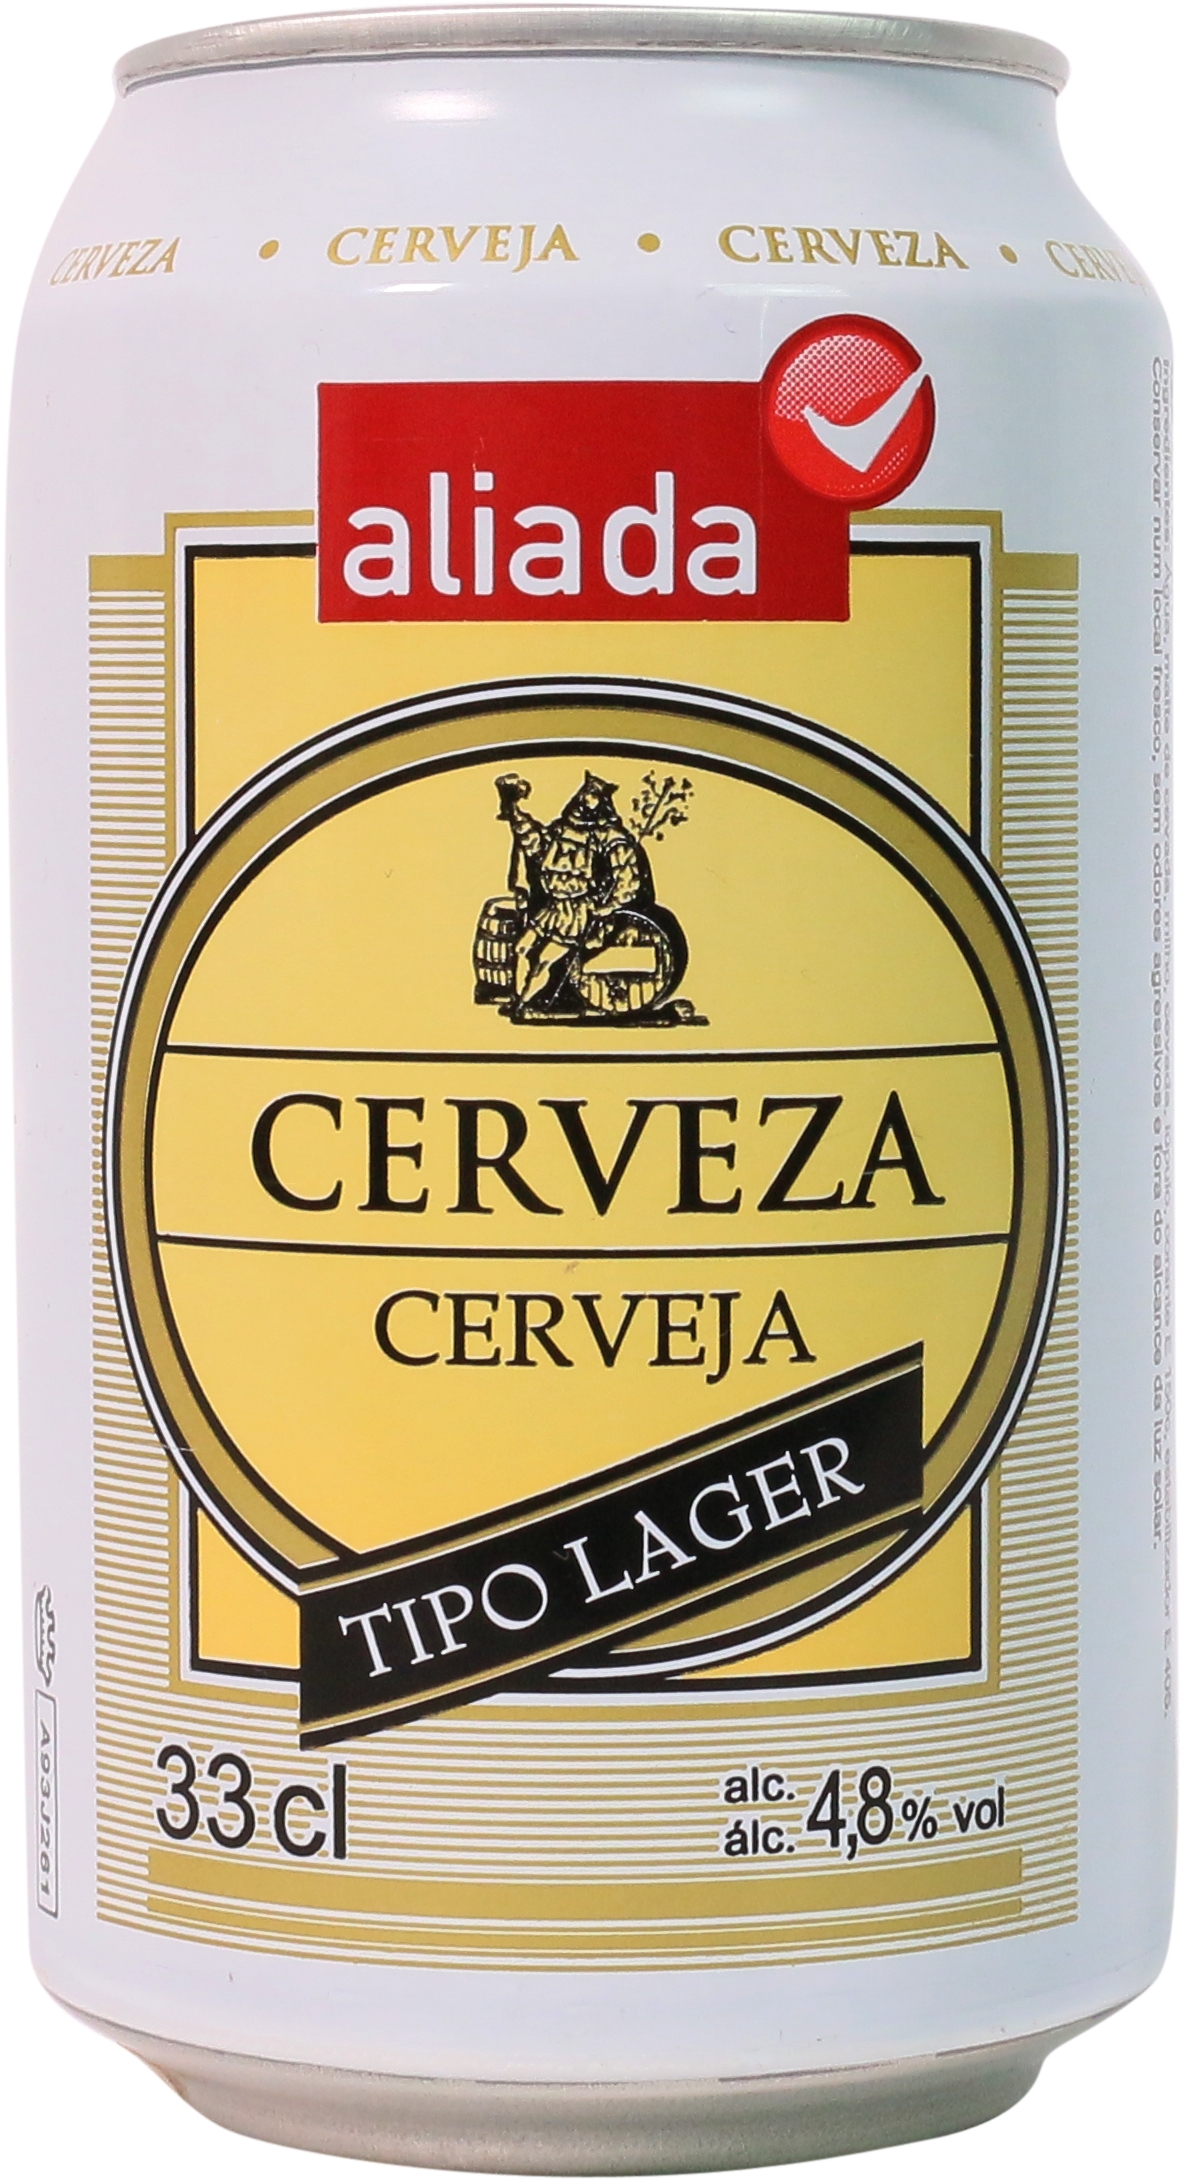 CERVEZA TIPO LAGER